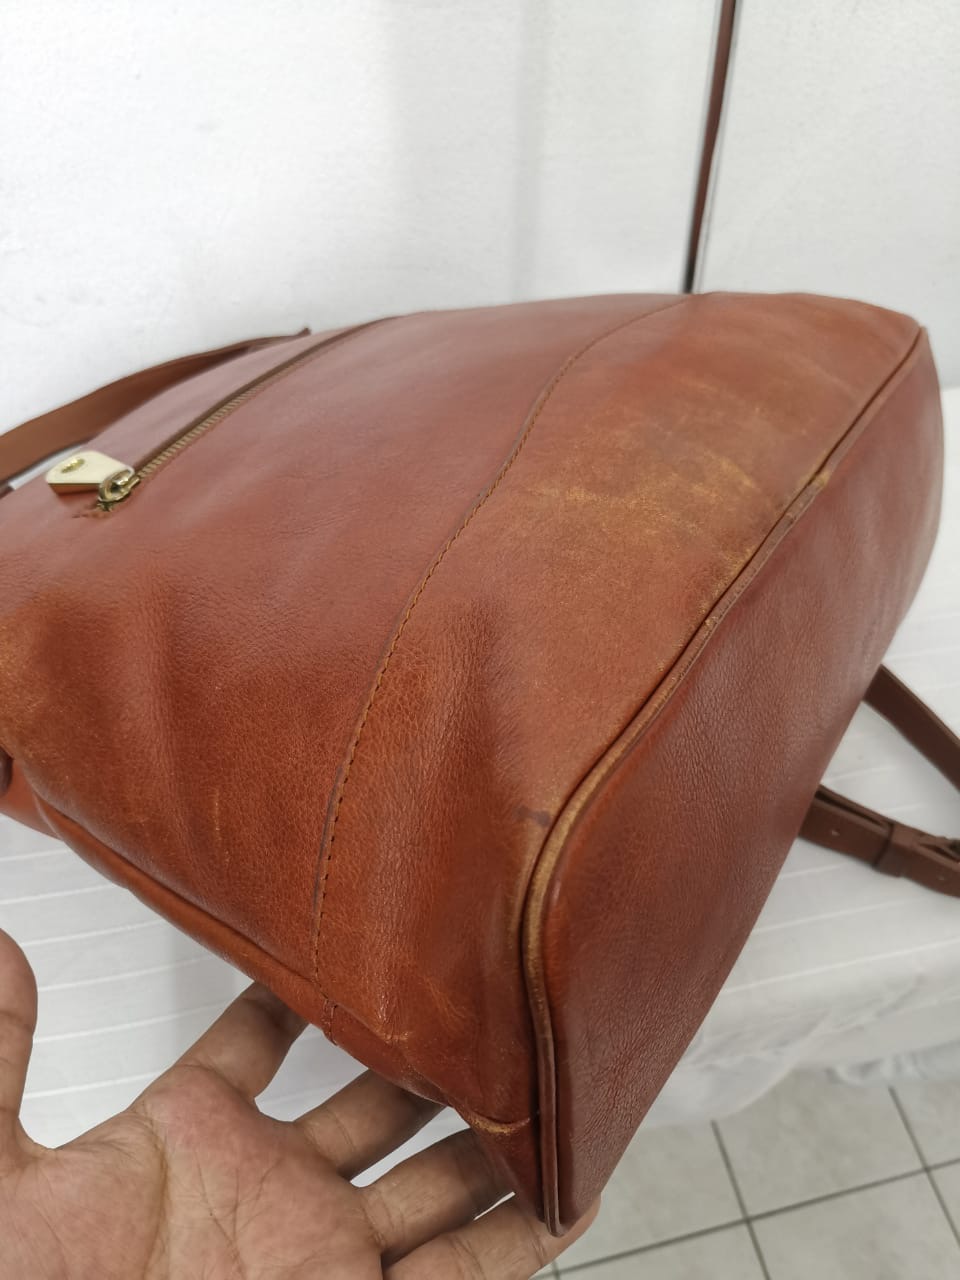 Vintage Mulberry Leather Handle Bag - 13